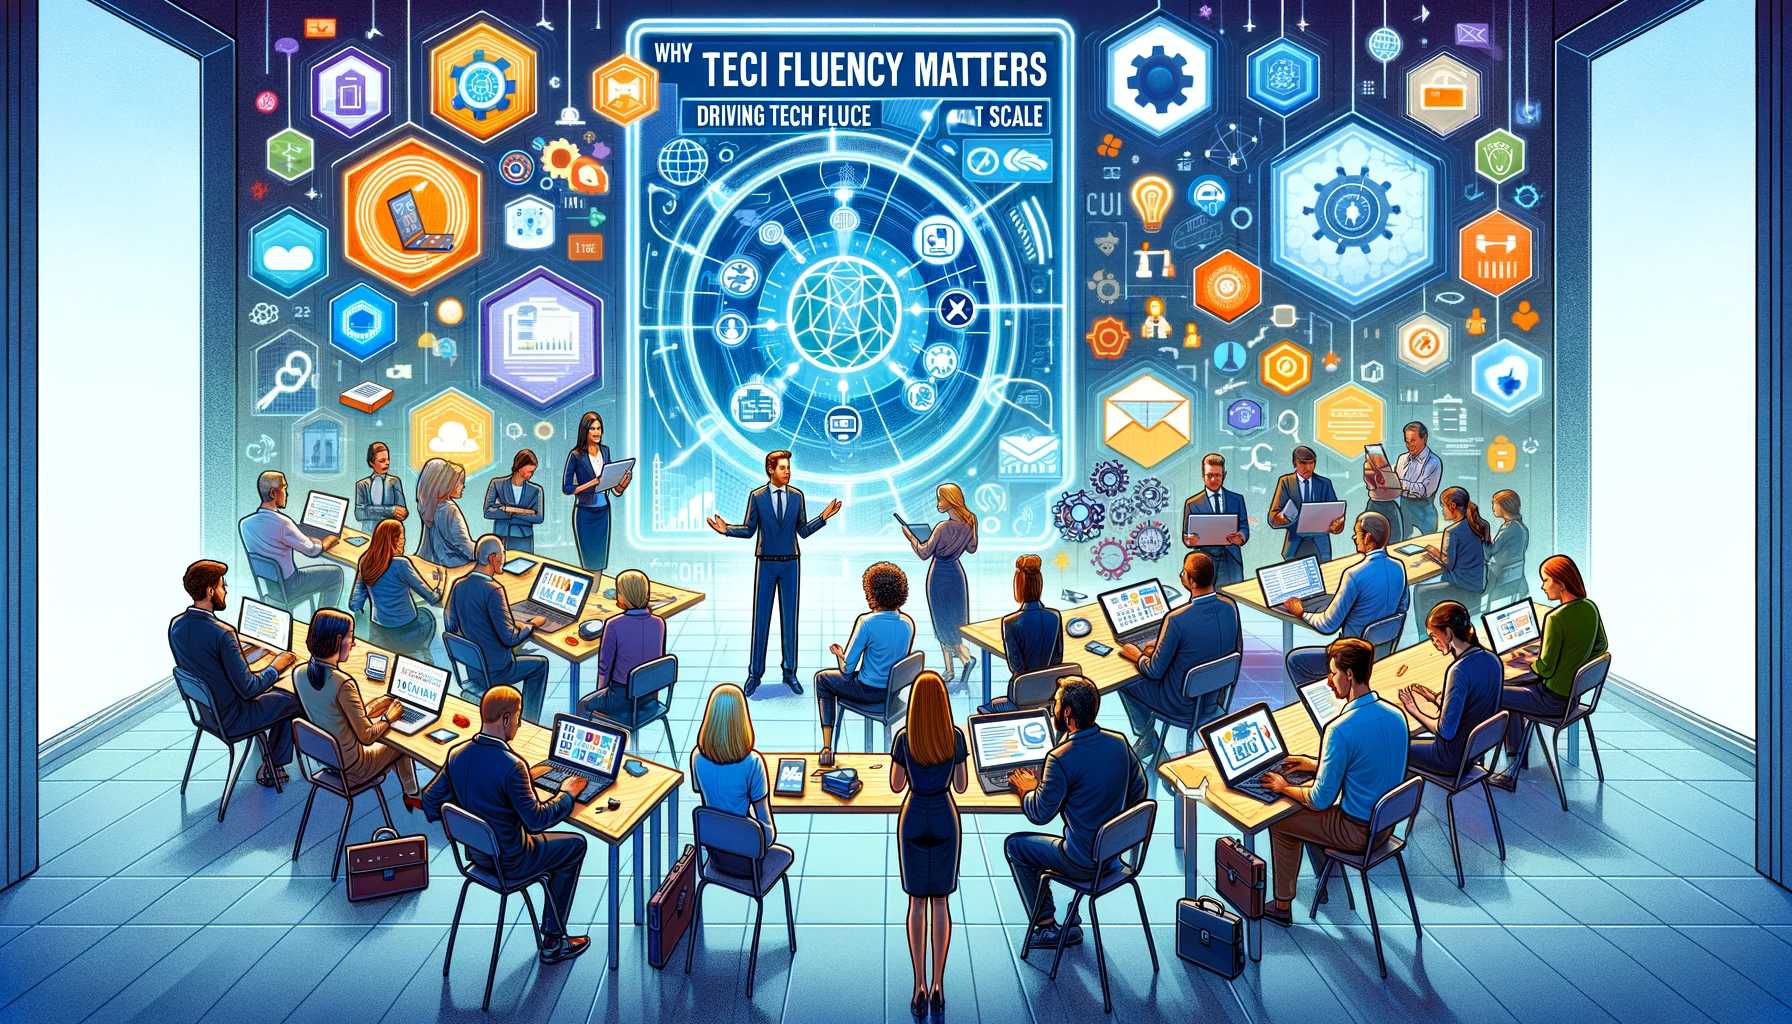 Why Tech Fluency Matters: Driving Tech Fluency at Scale